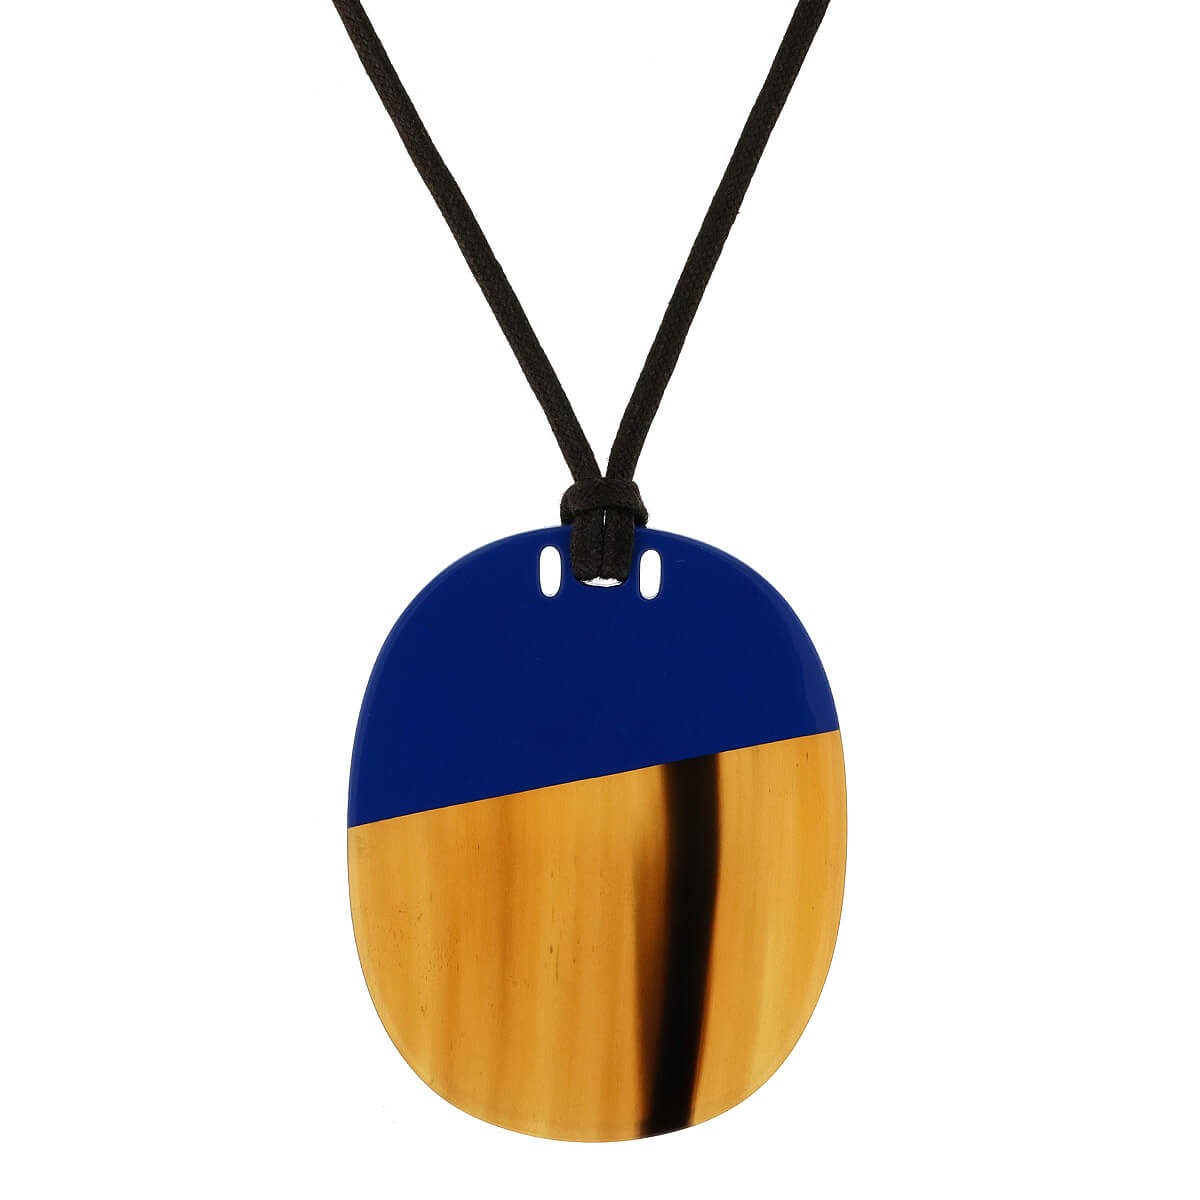 Hermes Buffalo Horn H Necklace - My Little Hermes Collection